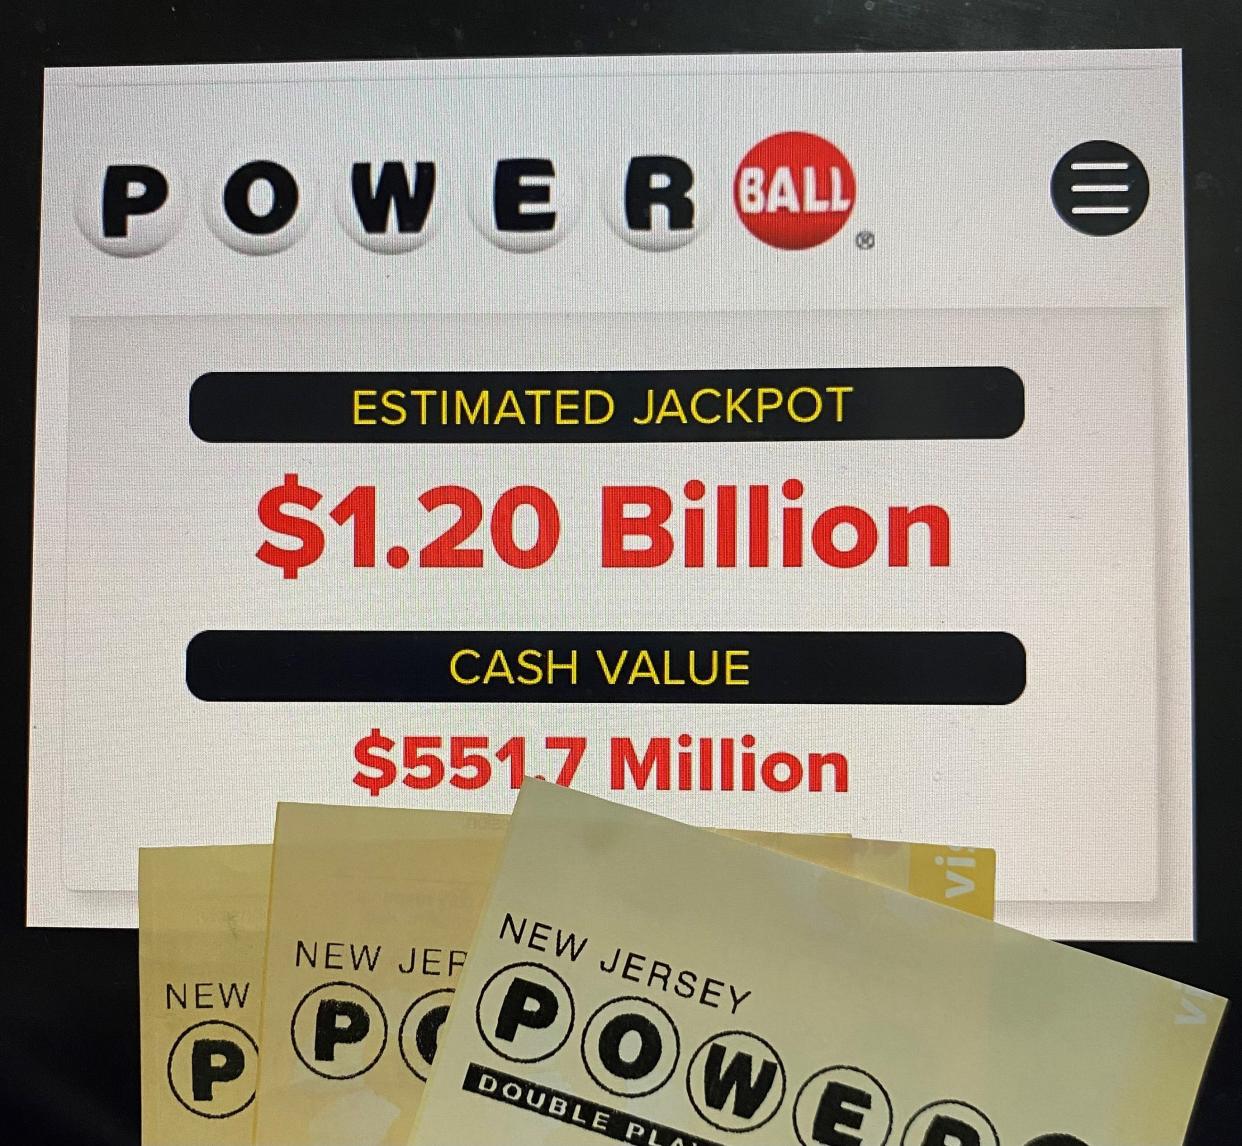 The Powerball jackpot will increase to $1.2 billion for Wednesday night's drawing - its third largest ever.